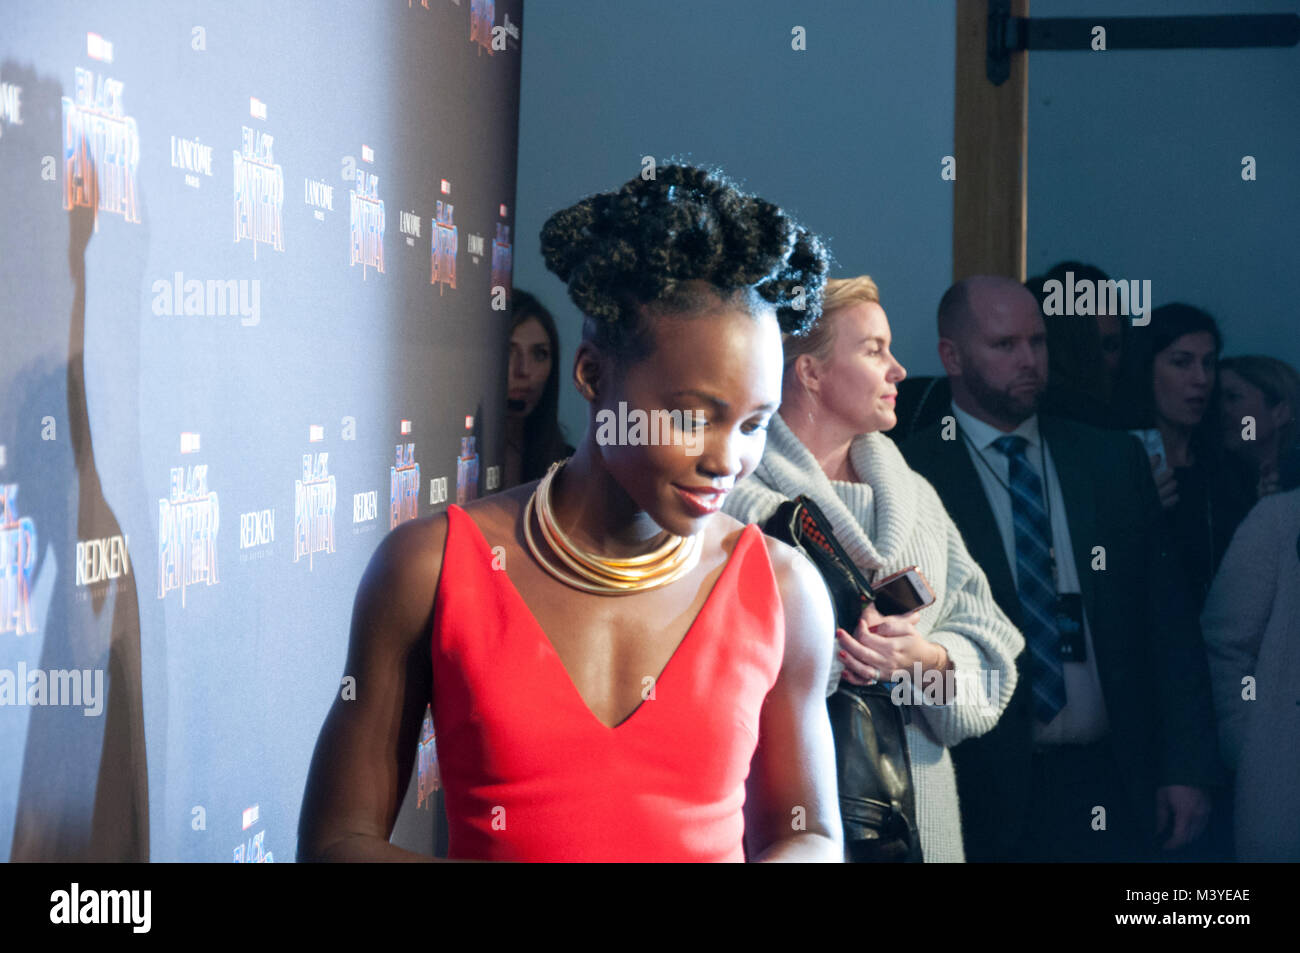 New York, USA. 12th February, 2018. Marvel Black Panther Red Carpet Event at NYFW Credit: Lauren Browdy/Alamy Live News Stock Photo